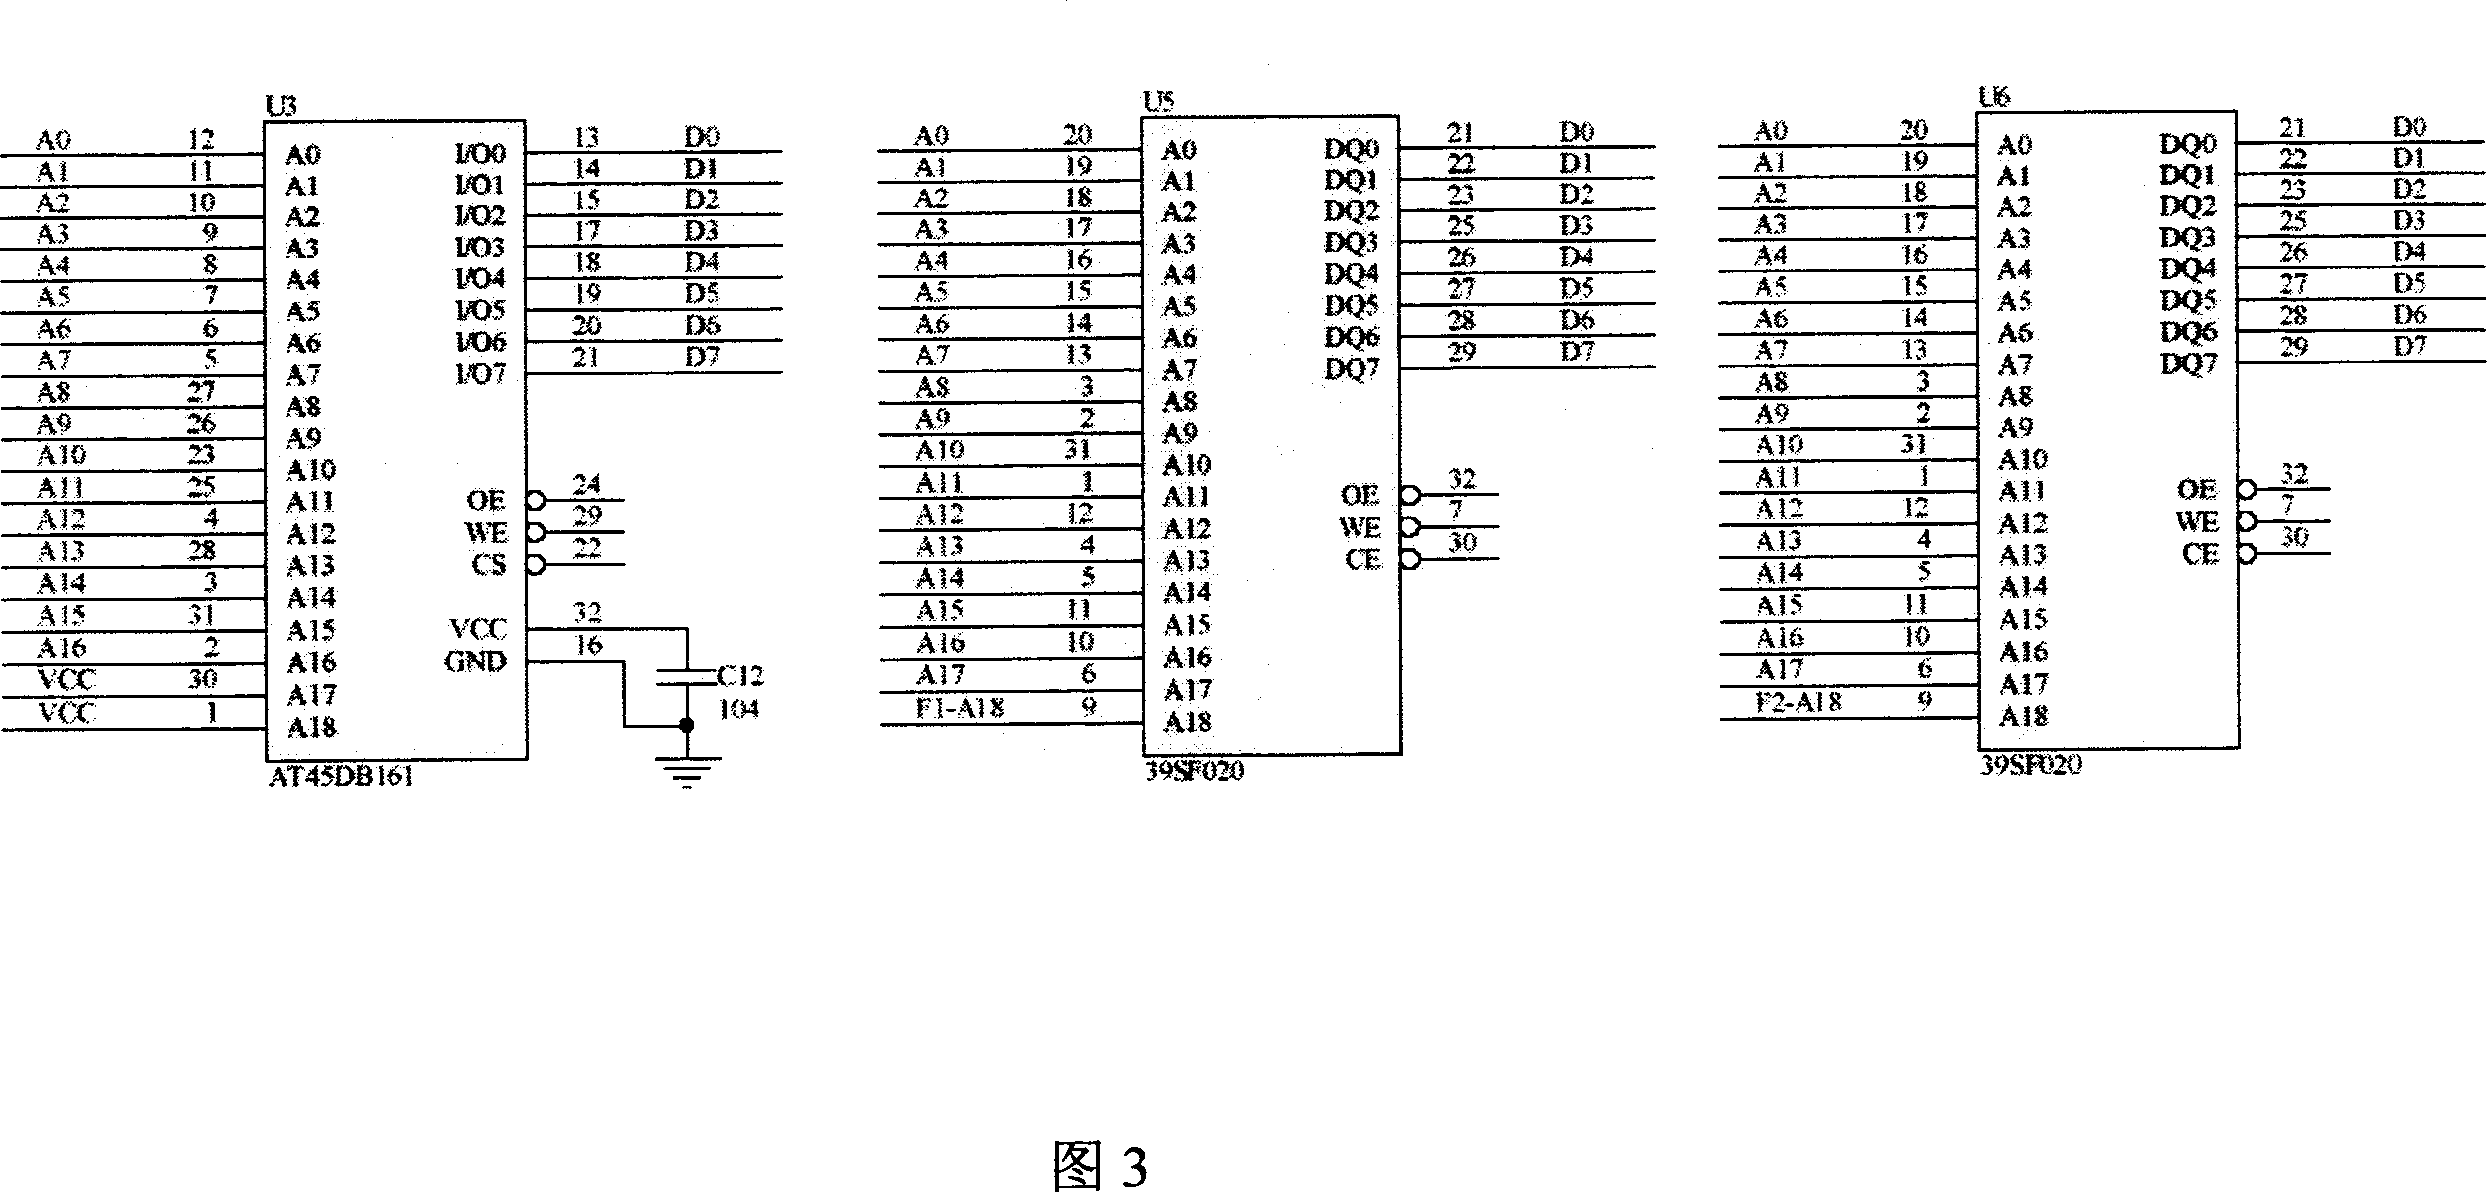 Multiplex communication server in Ethernet and control method